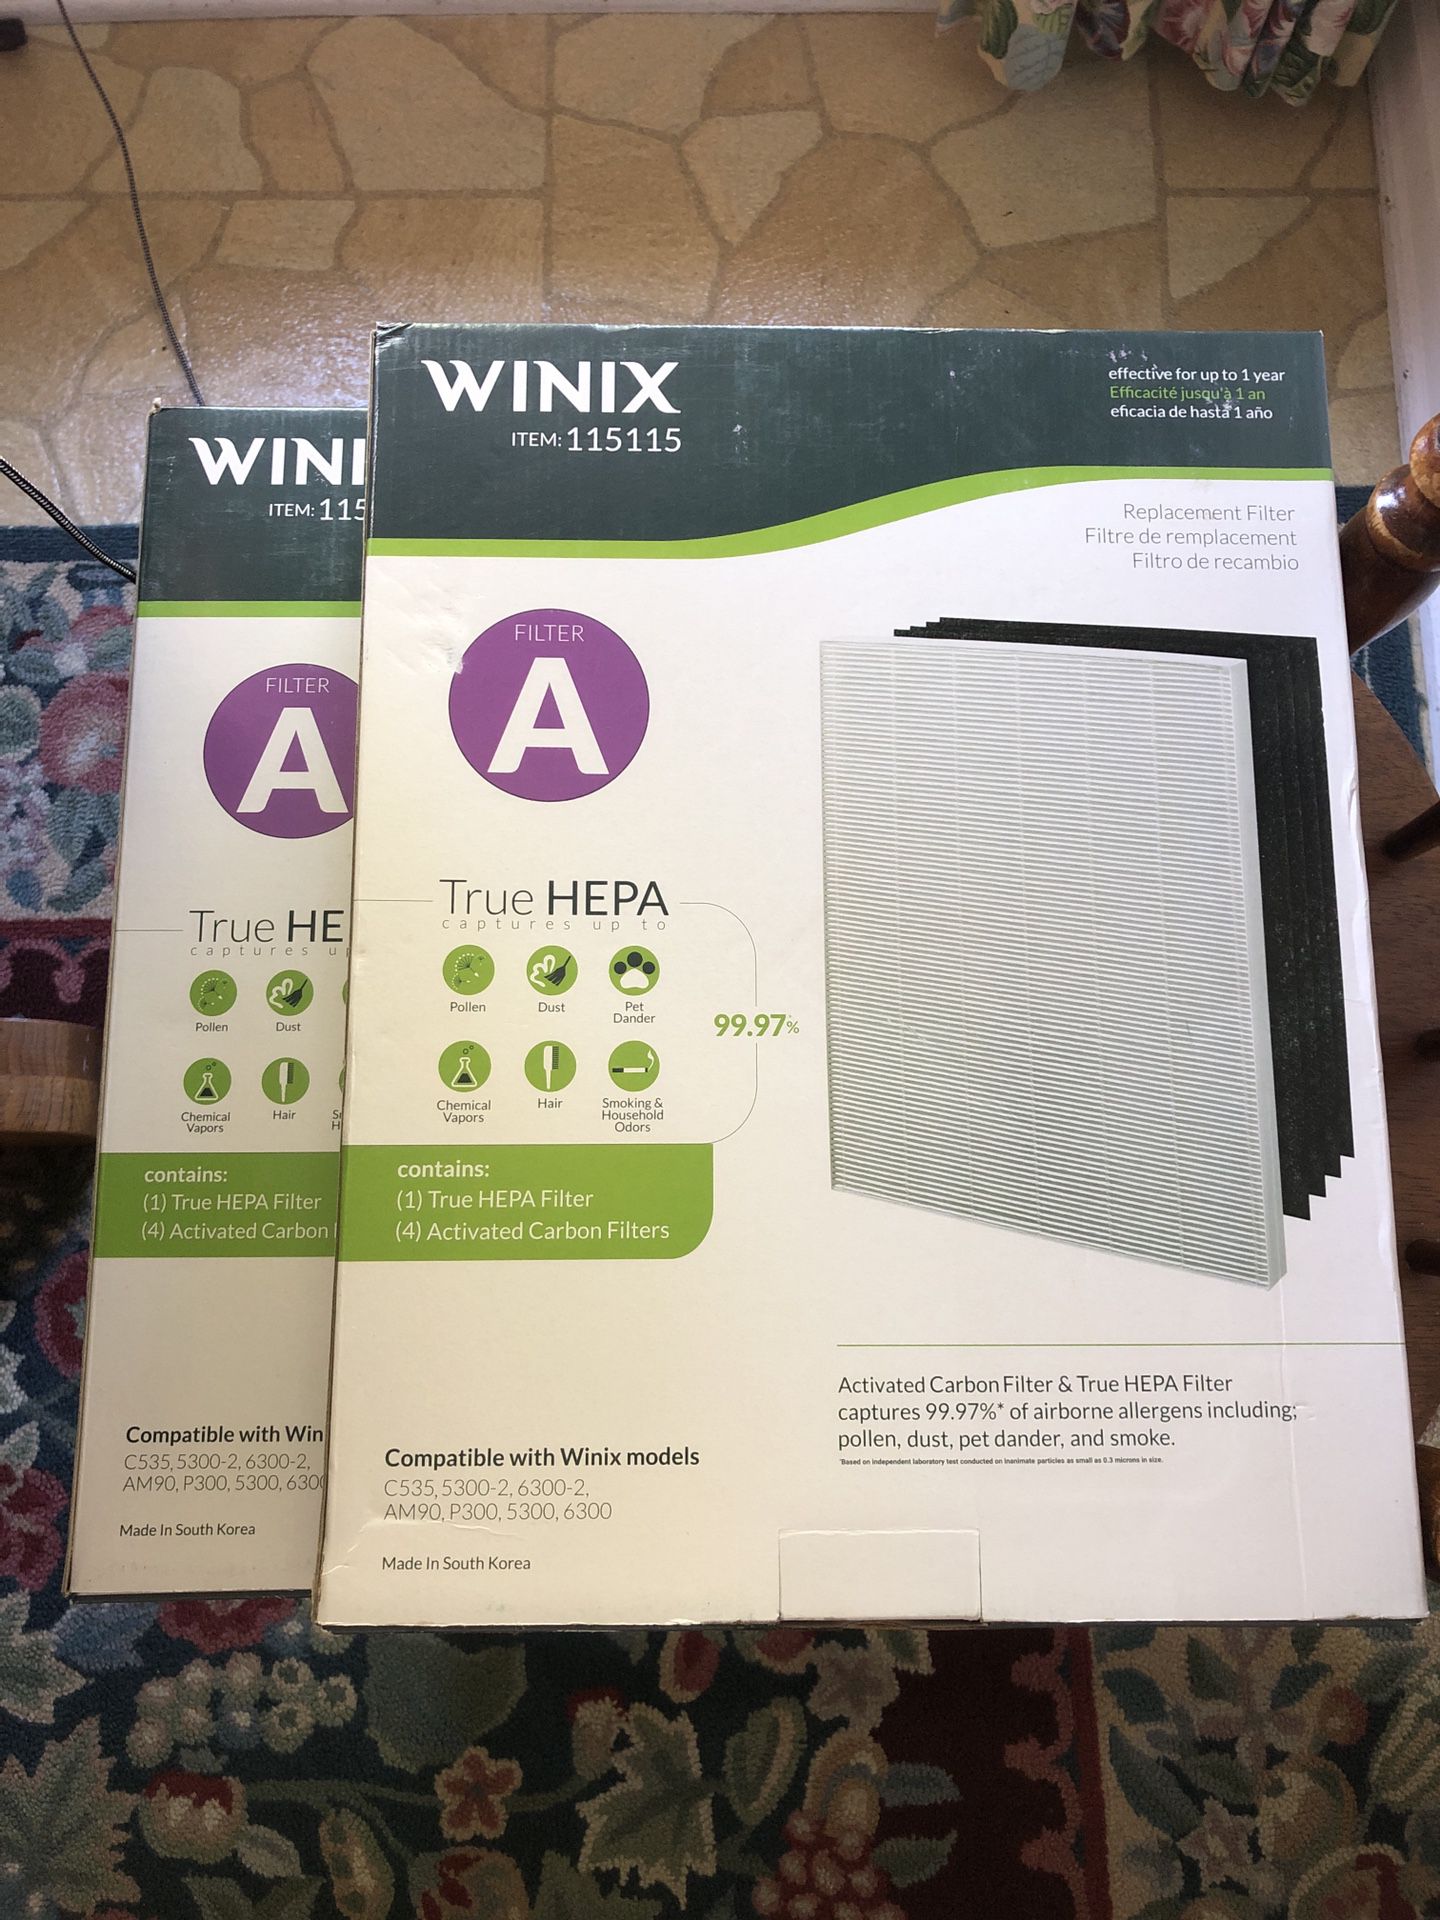 NIB Pair Of WINIX True HEPA Replacement Filter (A) w/4 Activated Carbon Filters Sealed - Compare @$70+